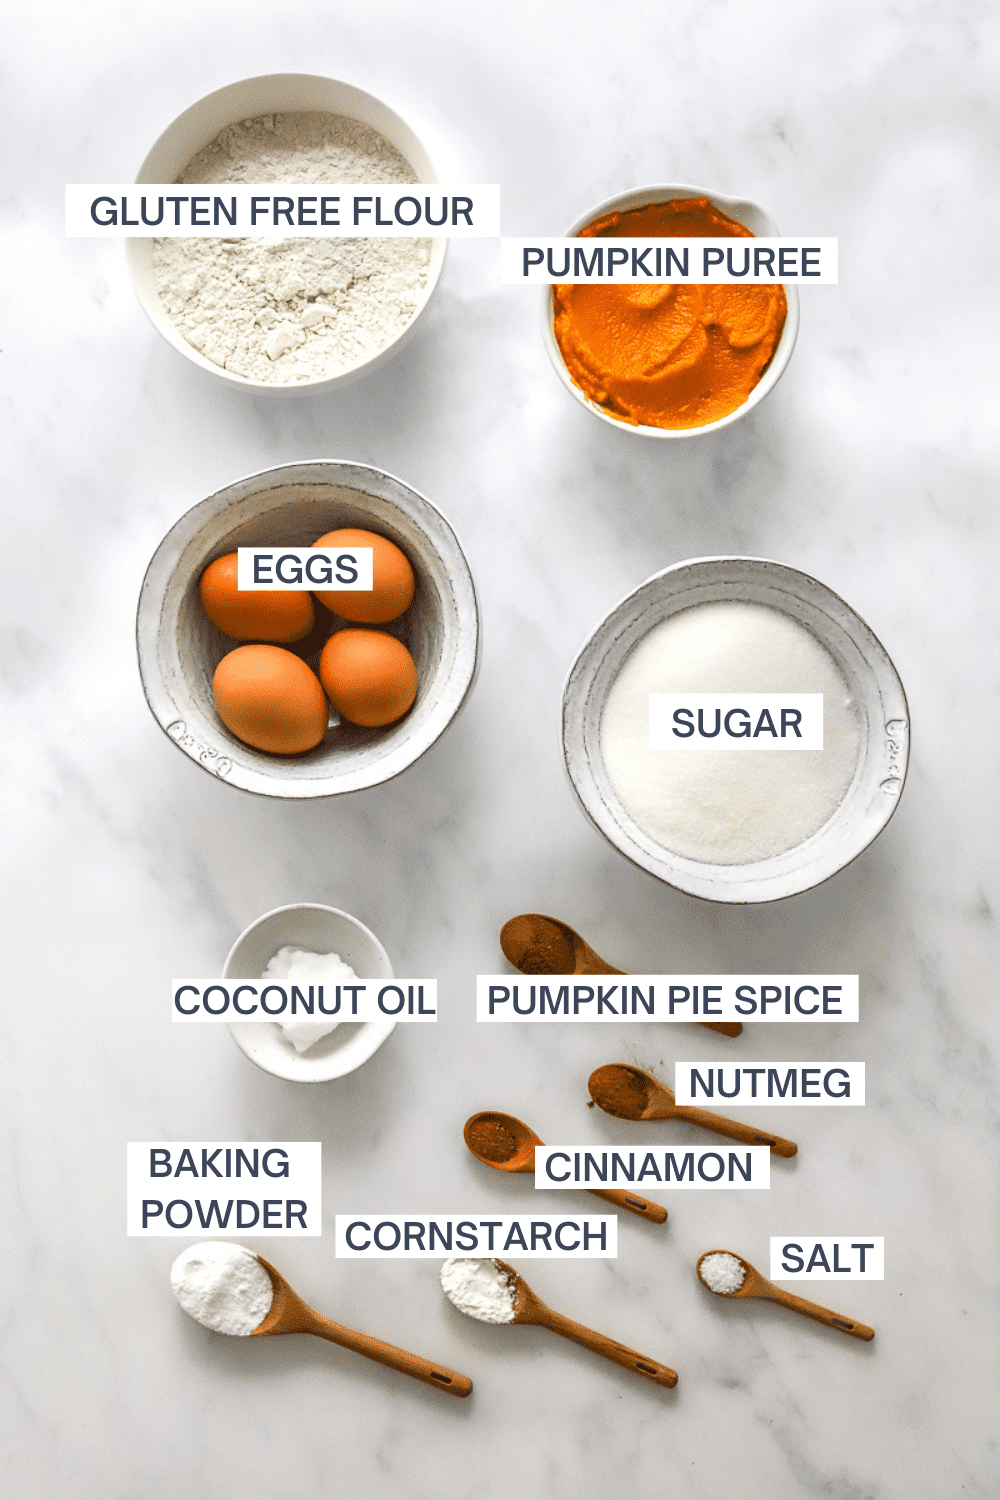 Bowl of white flour with a bowl of pumpkin puree next to it with a bowl of brown eggs, a bowl of white sugar, and wooden spoons filled with borne spices and baking powder in front of it. With labels for each ingredient. 